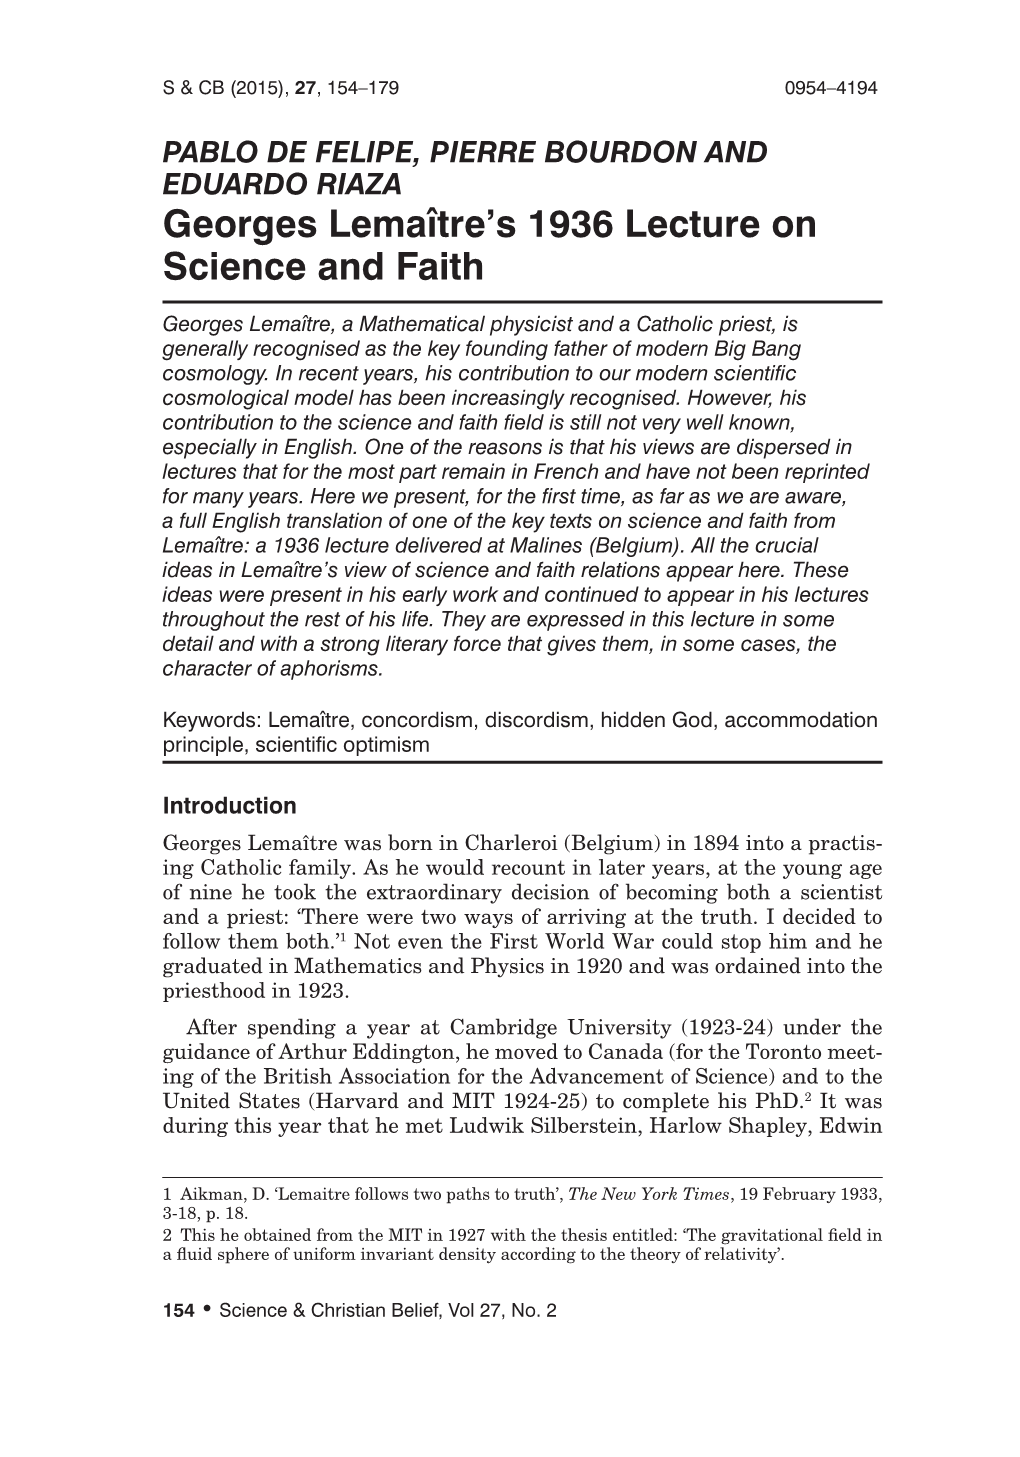 Georges Lemaître's 1936 Lecture on Science and Faith